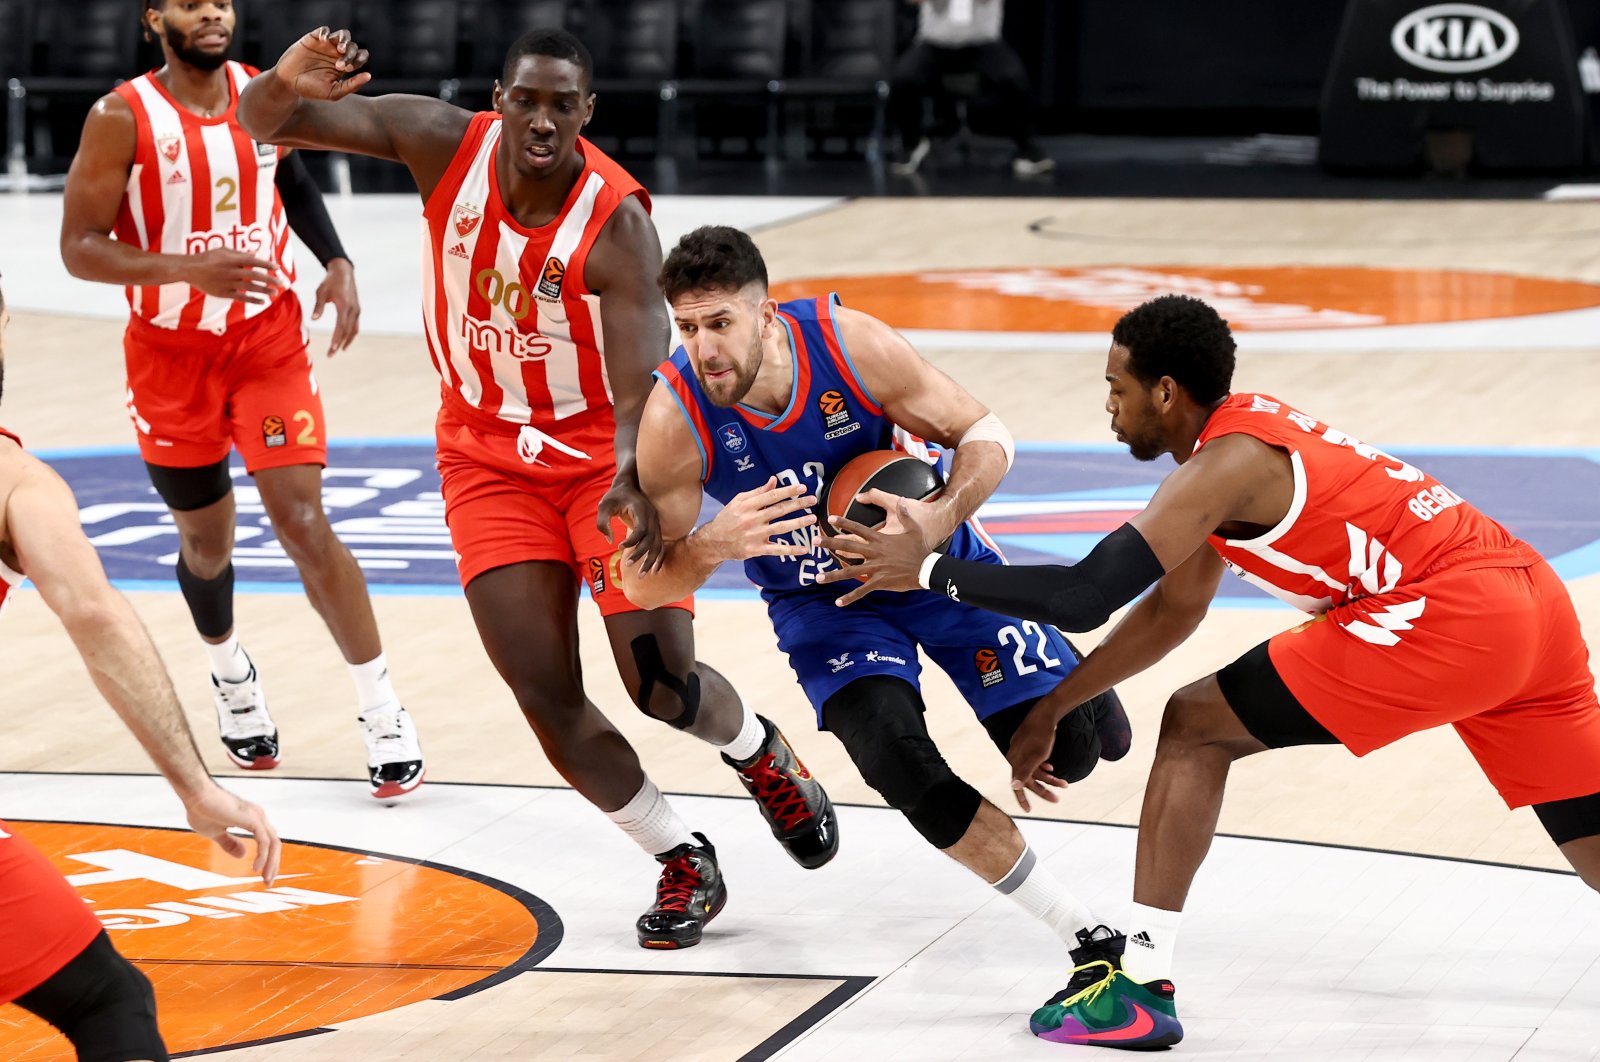 Anadolu Efes point guard Vasilije Micic (C) goes past two Crvena Zvezda players in their Round 22 match in the THY EuroLeague, Sinan Erdem Sports Center, Istanbul, Jan. 26, 2021. (AA Photo)